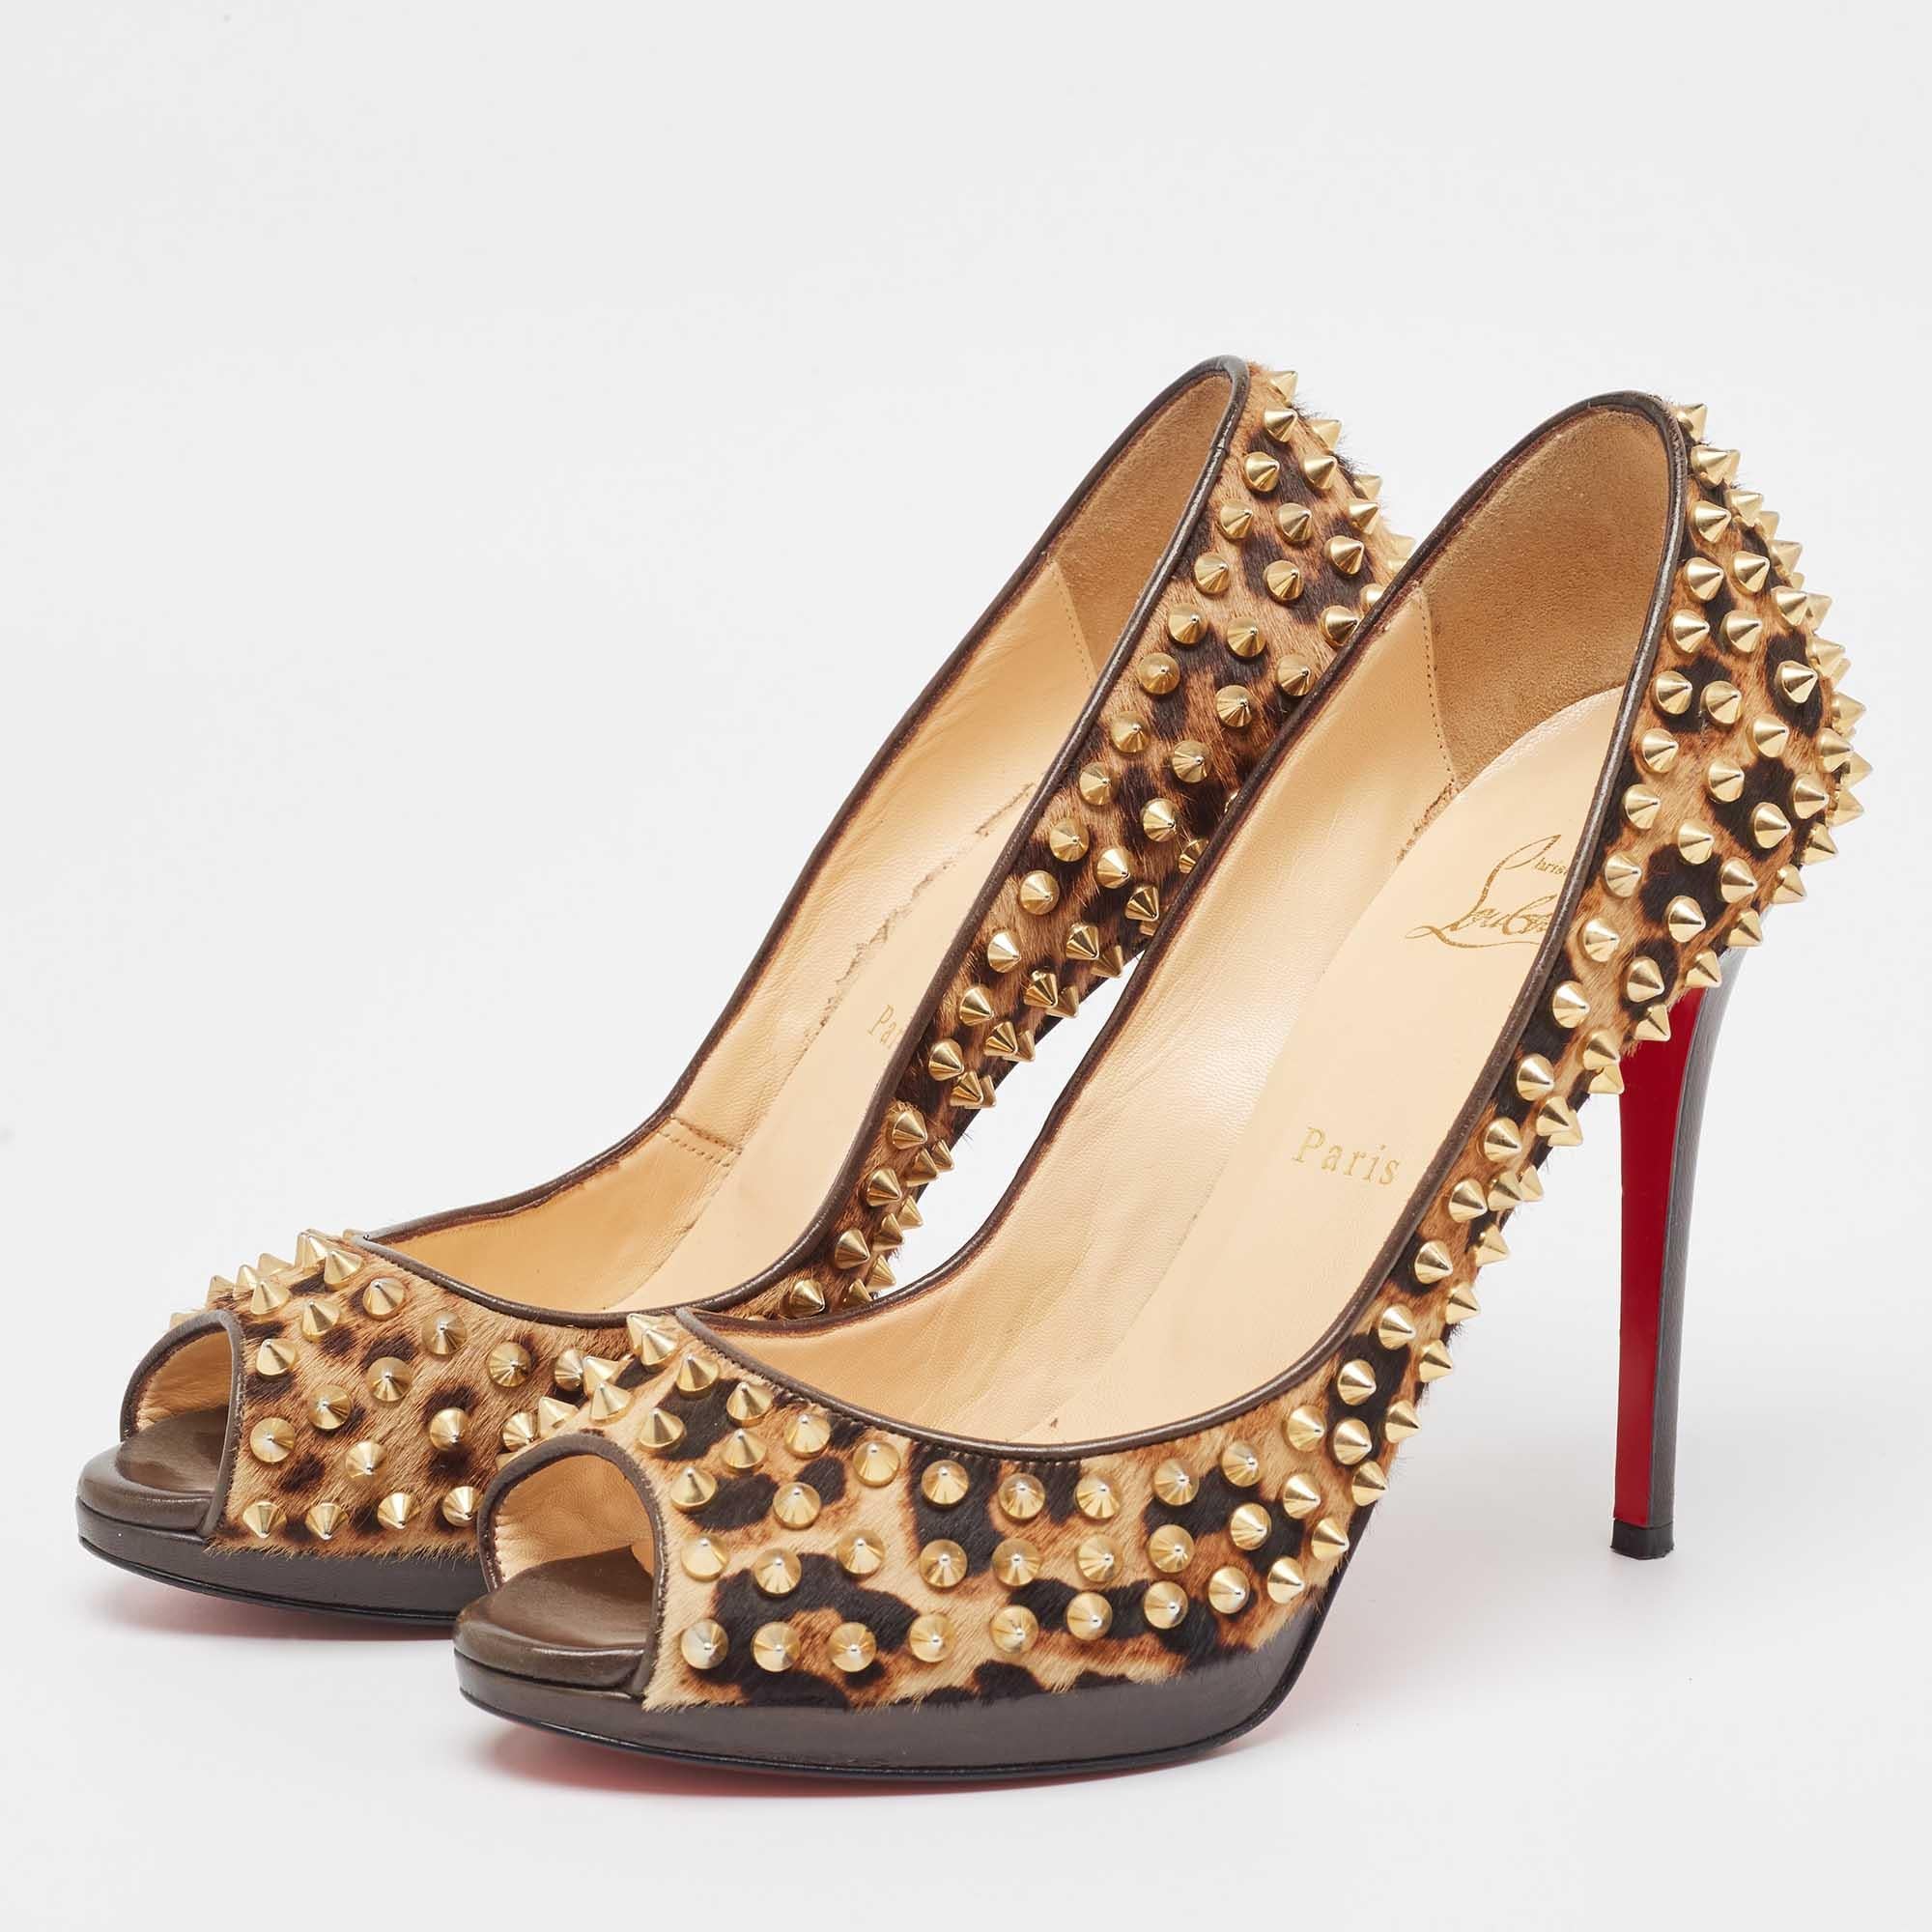 Discover footwear elegance with these Christian Louboutin women's pumps. Meticulously designed, these heels marry fashion and comfort, ensuring you shine in every setting.

